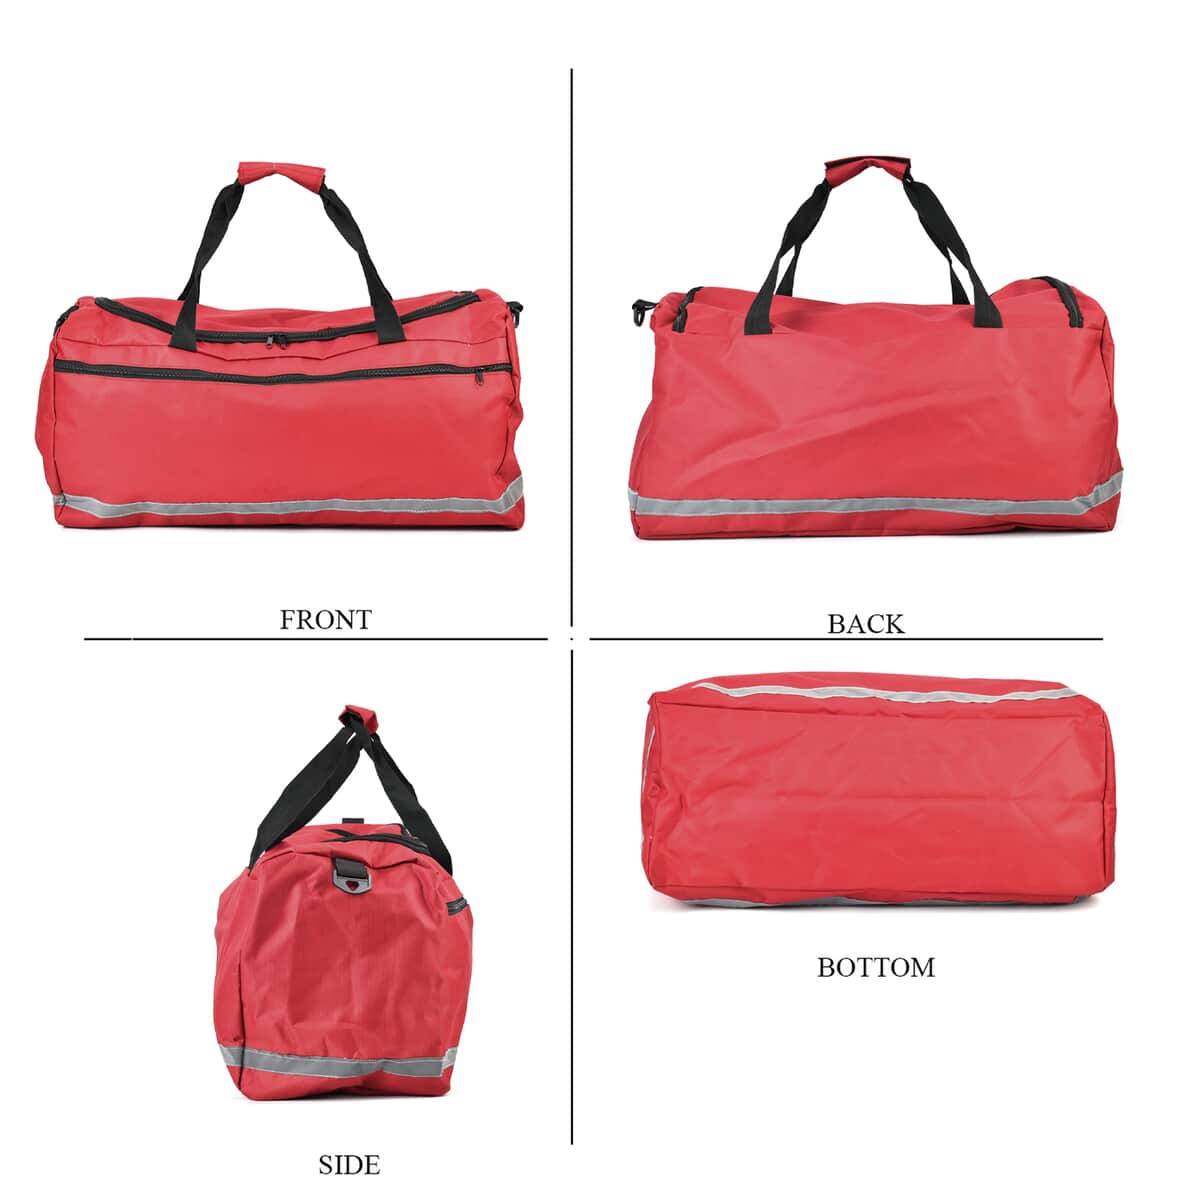 Red Polyester Large-capacity Travel Bag (24.4"x9.5"x12") with Shoulder Strap image number 3